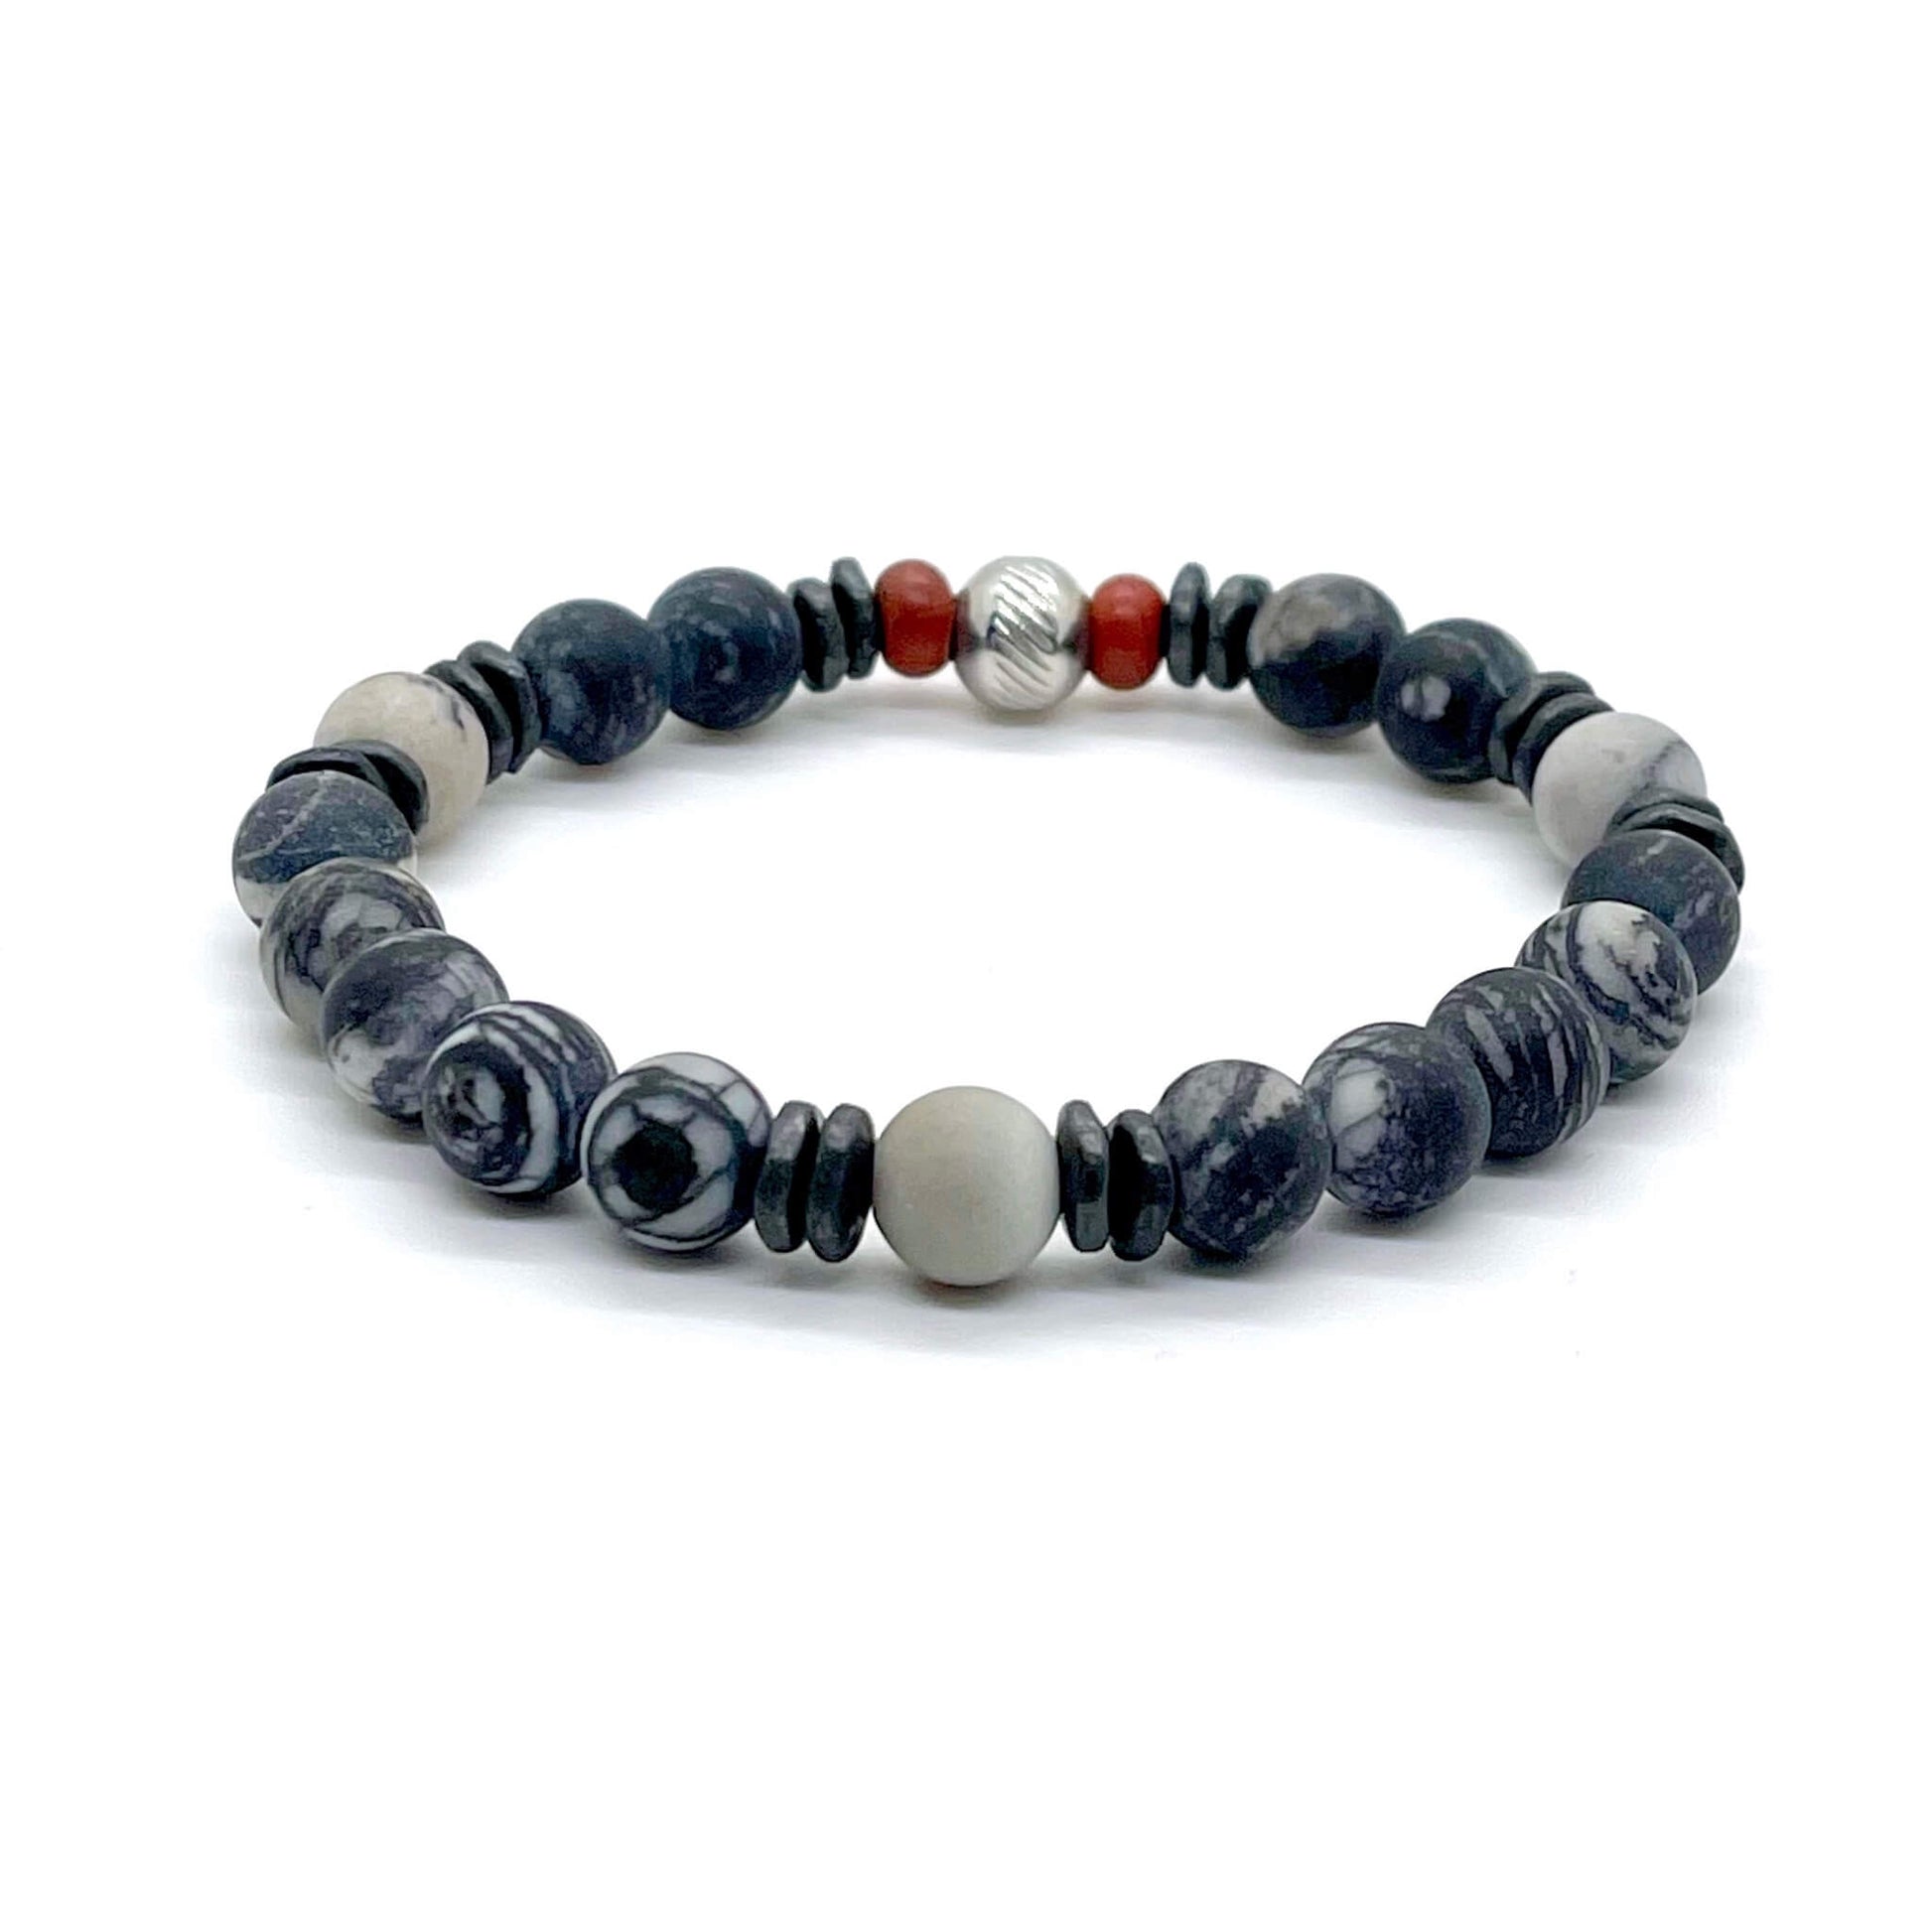 Men's modern swirled white and black gemstone bracelet with red accent beads.